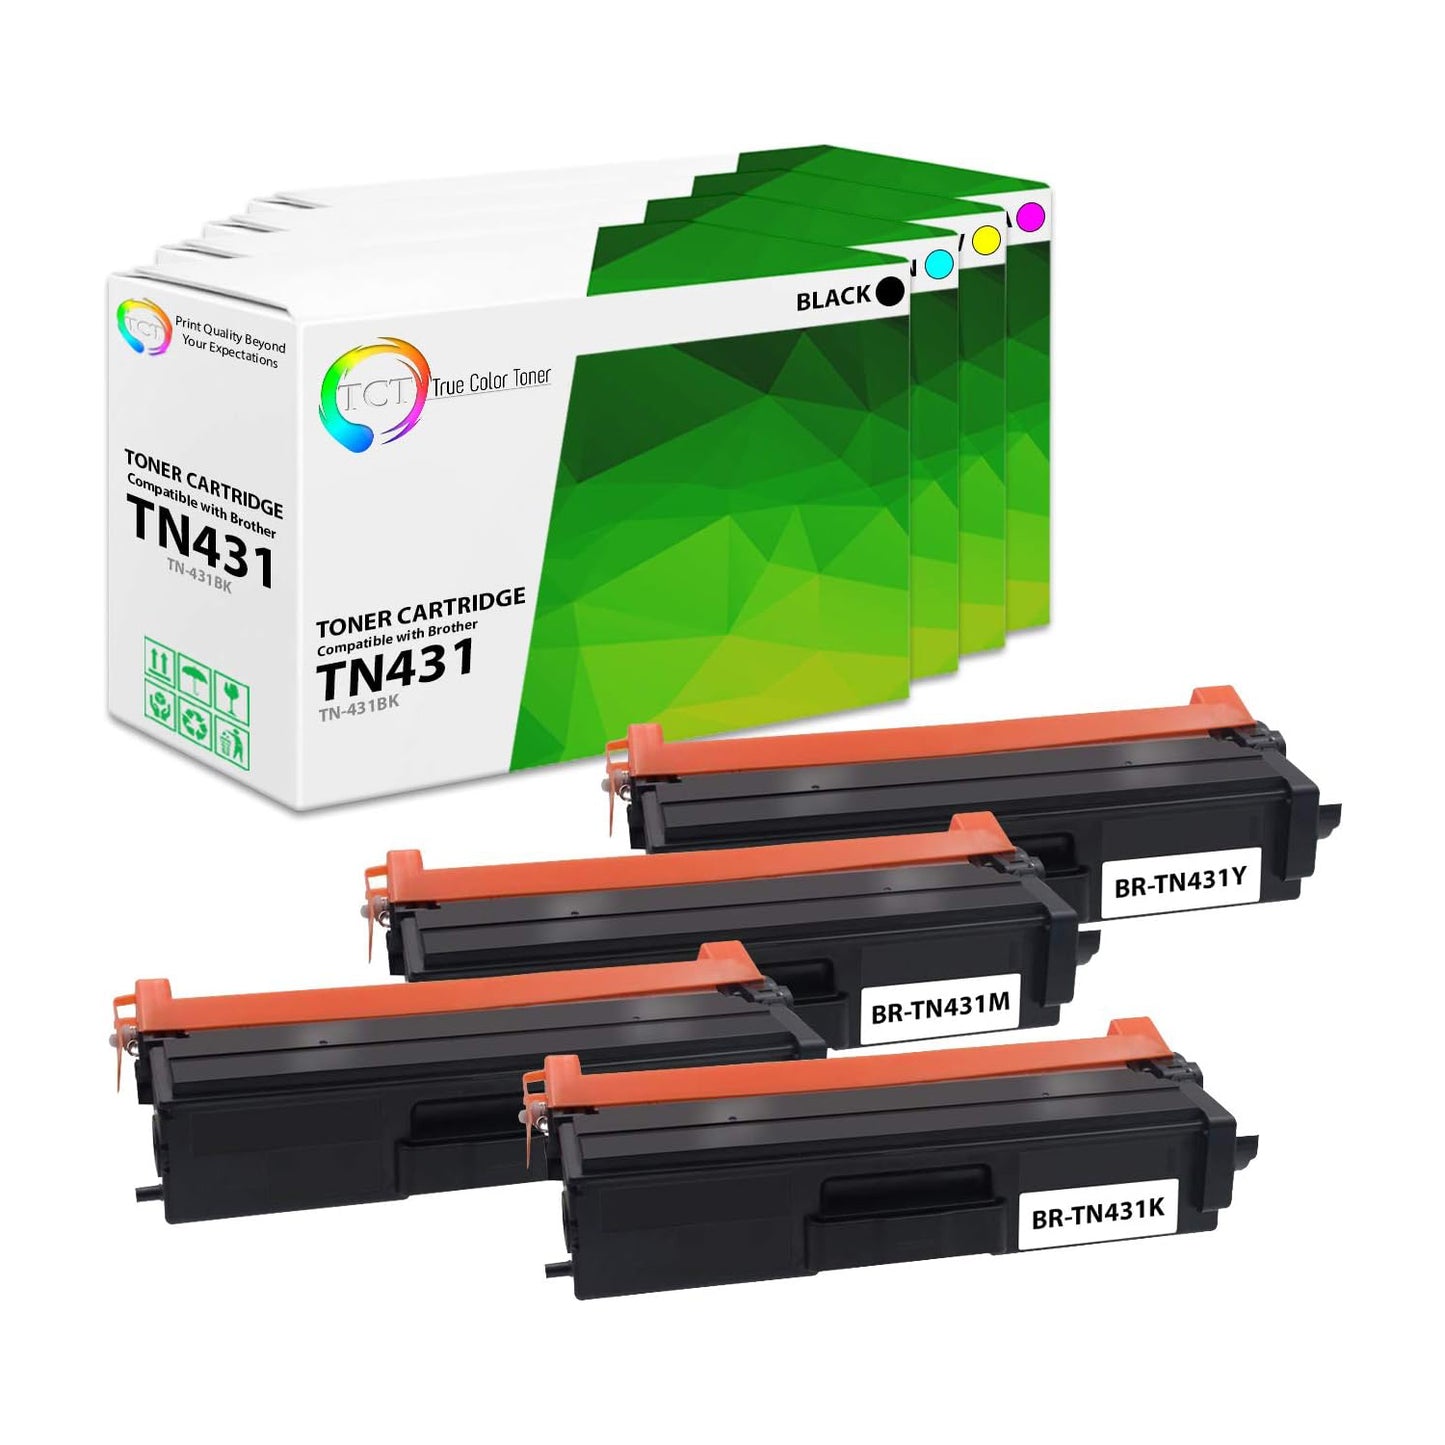 TCT Compatible Toner Cartridge Replacement for the Brother TN431 Series - 4 Pack (BK, C, M, Y)